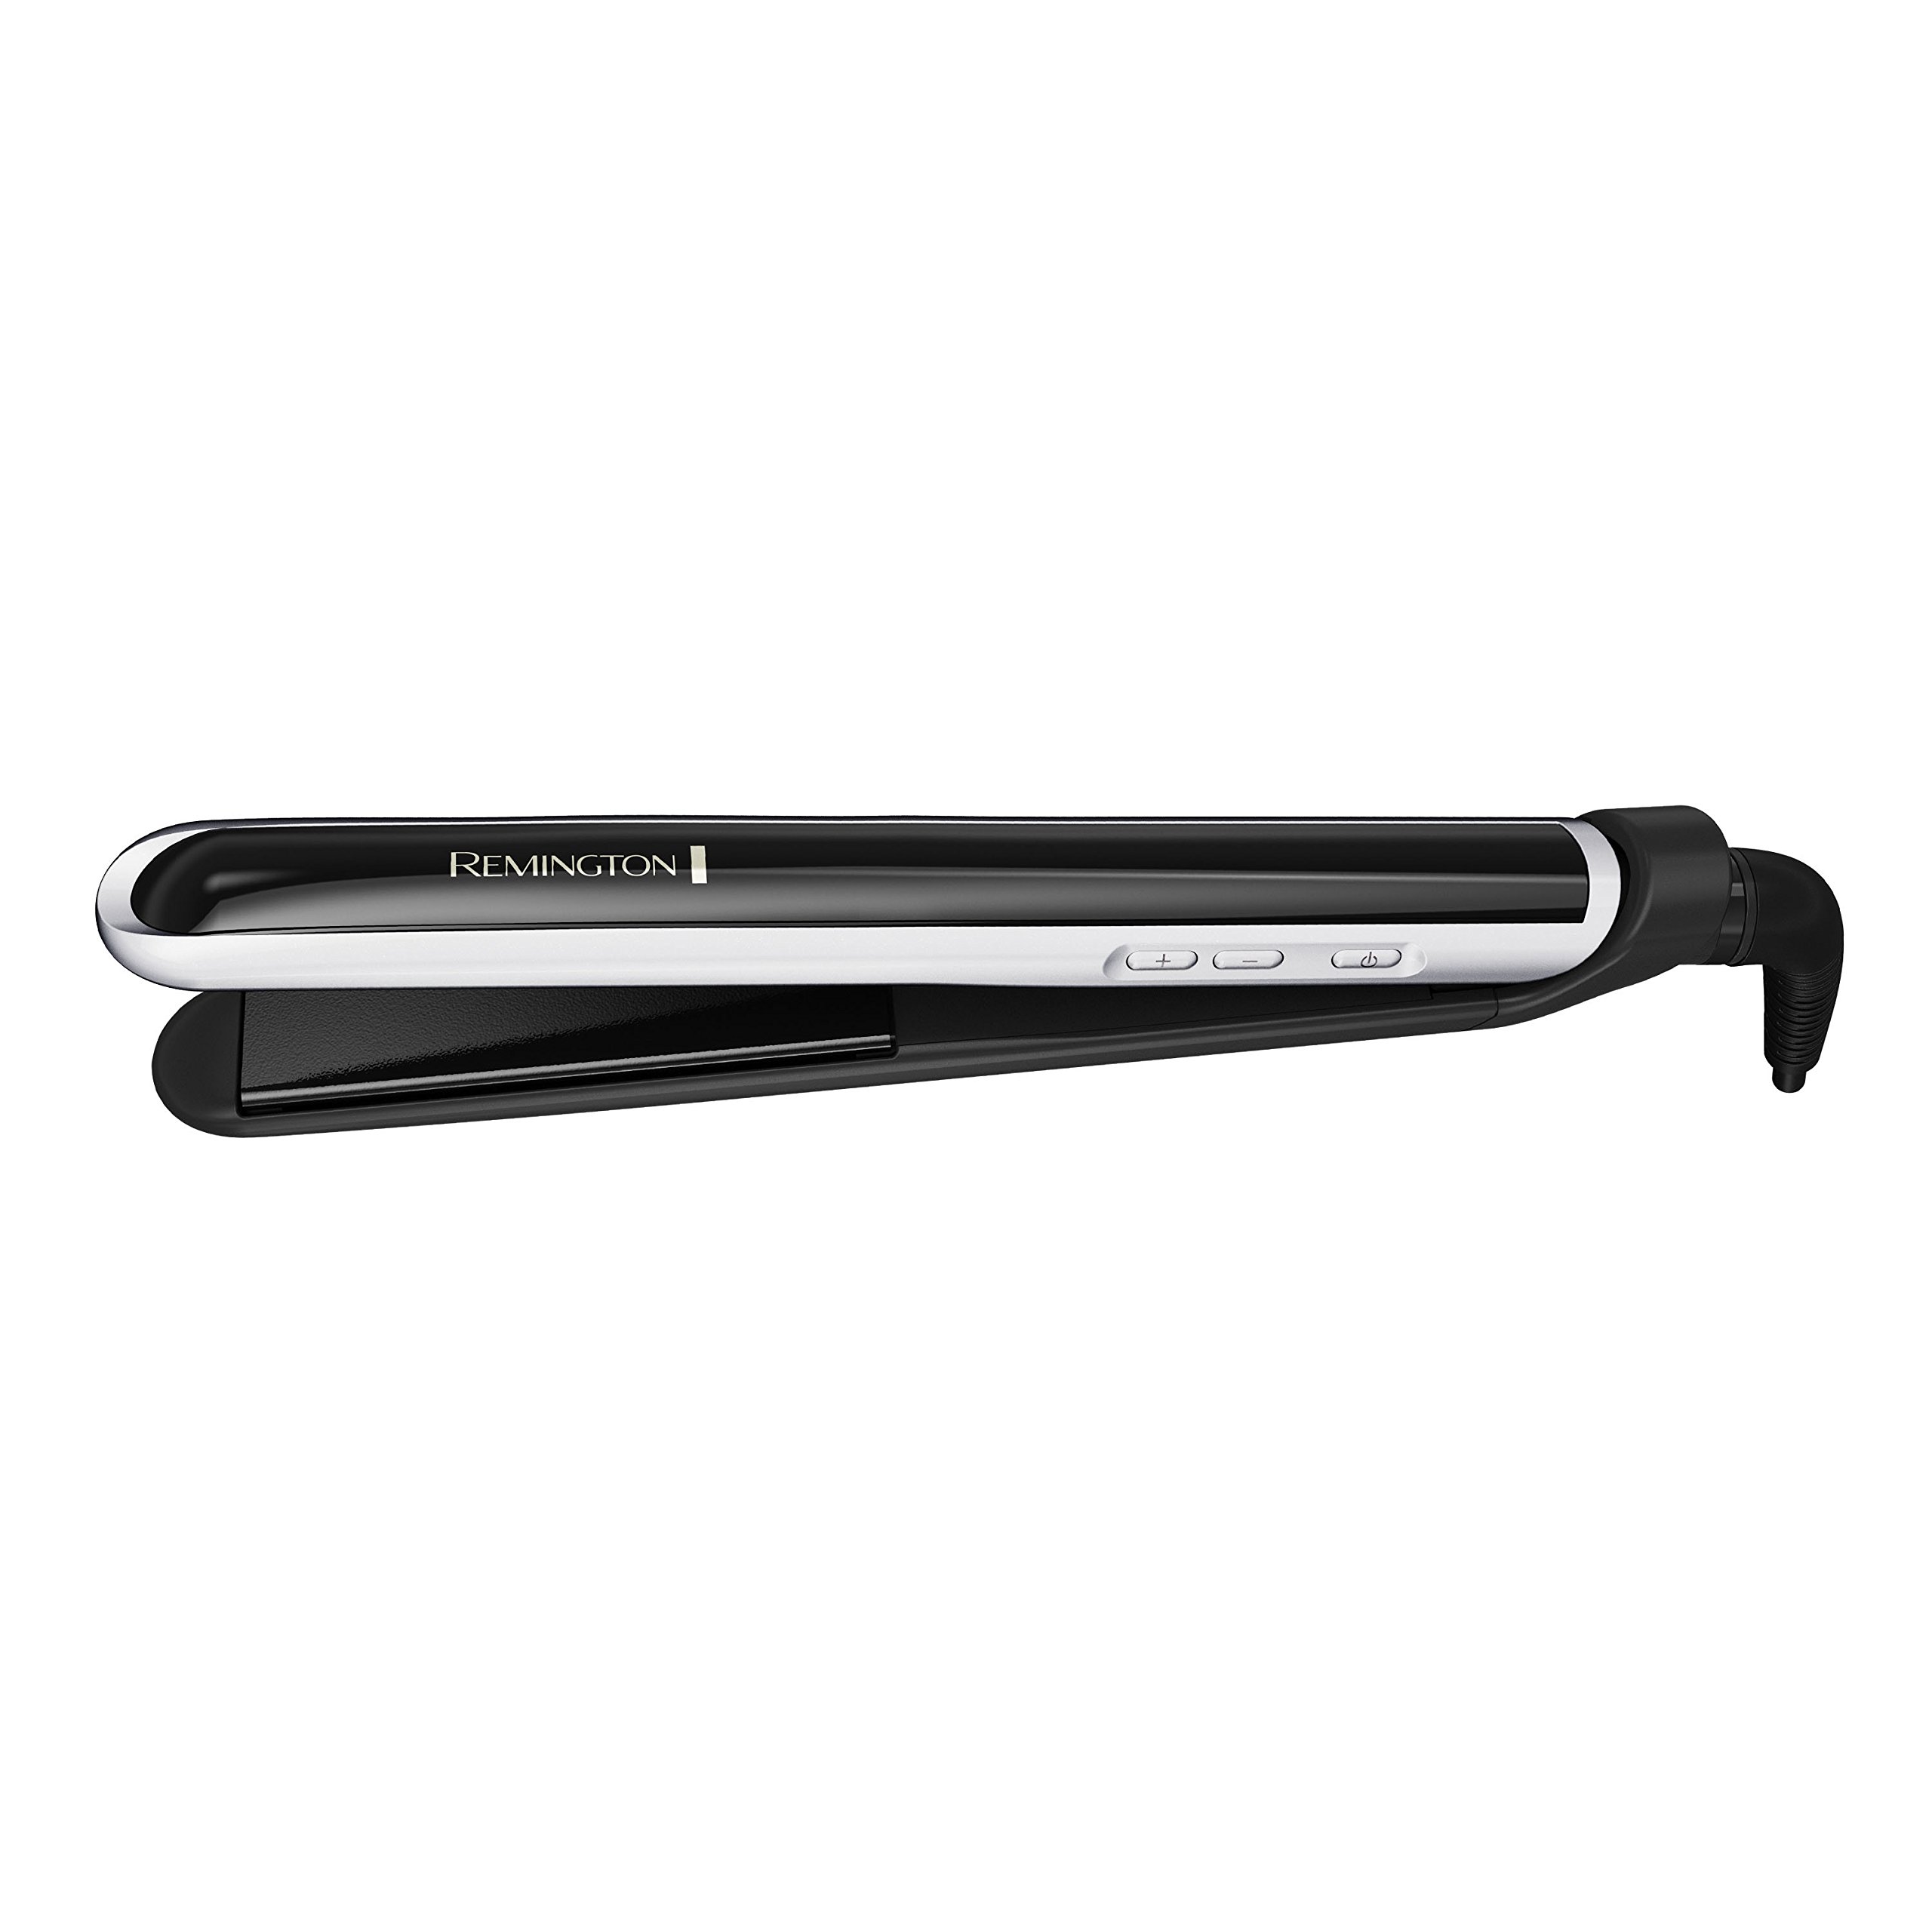 Remington Pearl Pro Ceramic Flat Iron Hair Straightener, 1-inch Floating Plates, Fast 30 Second Heat up, Black & White